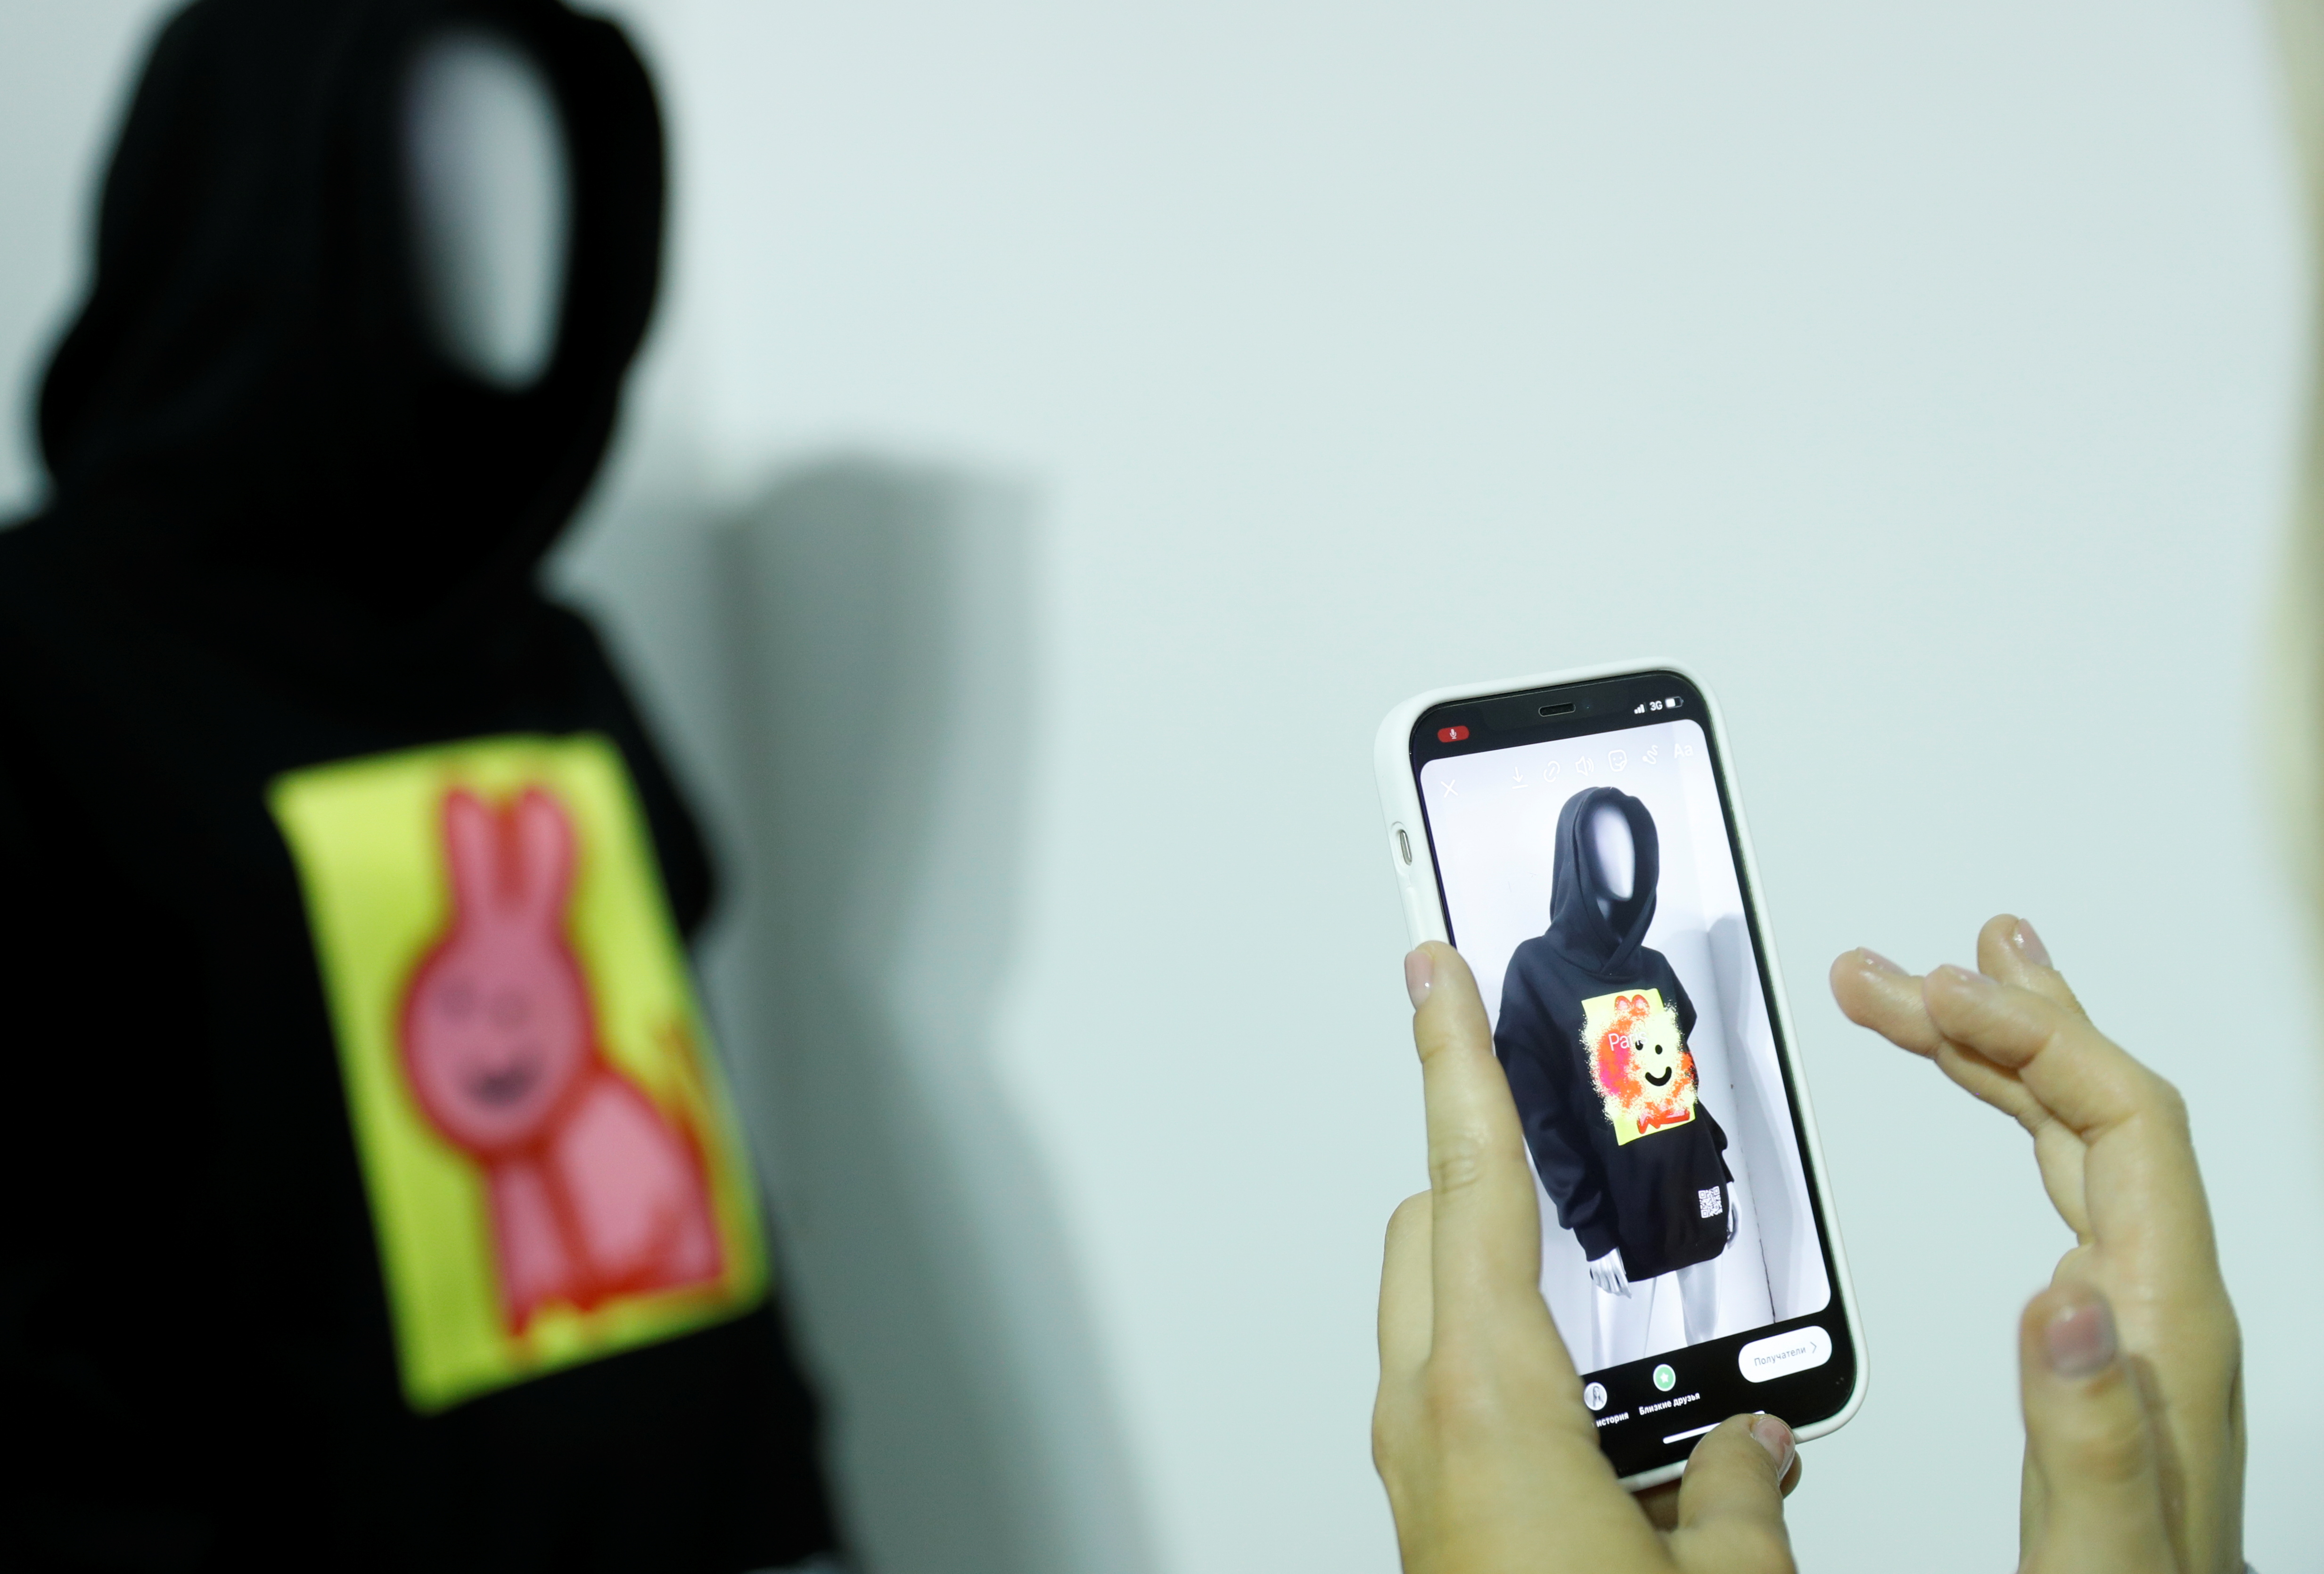 Presentation of augmented reality collection by FINCH brand during Ukrainian Fashion Week in Kyiv